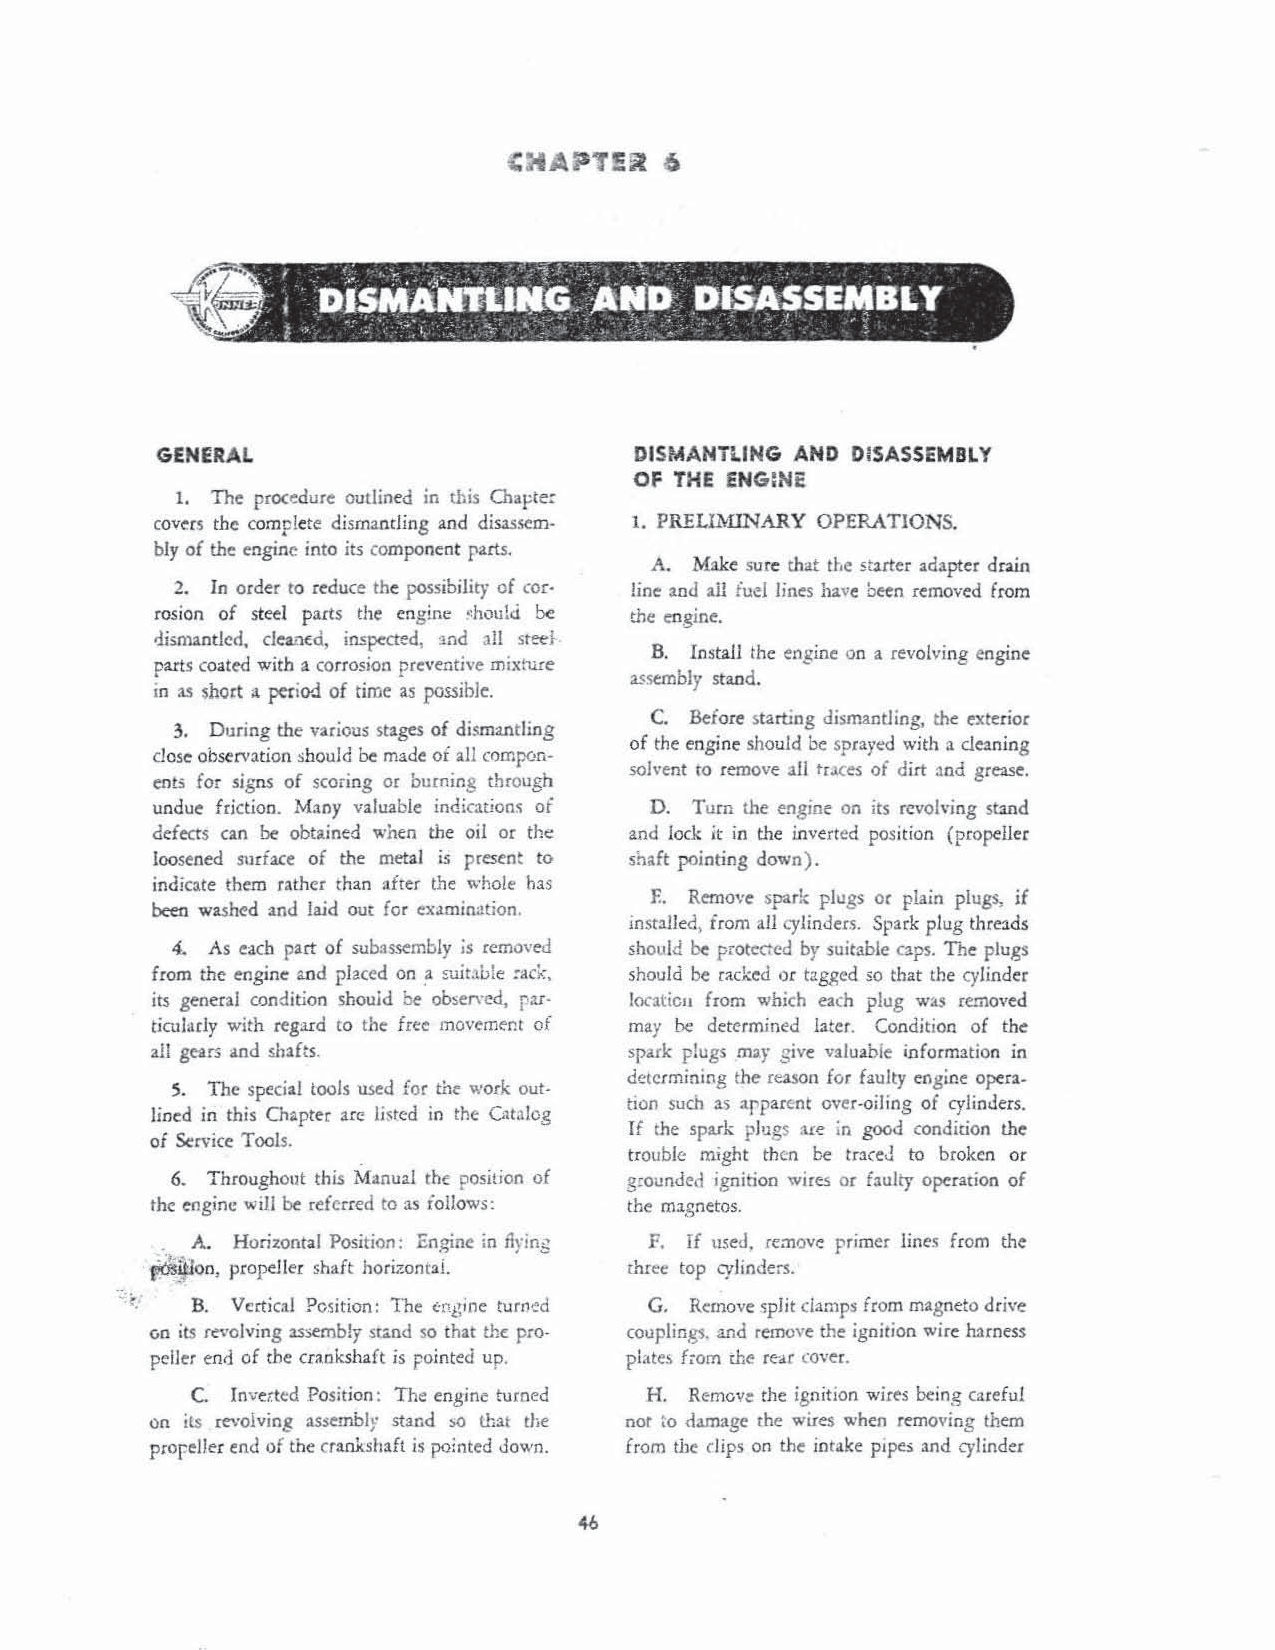 Sample page 44 from AirCorps Library document: Operation, Maintenance and Overhaul Manual - R-56 Kinner Engine